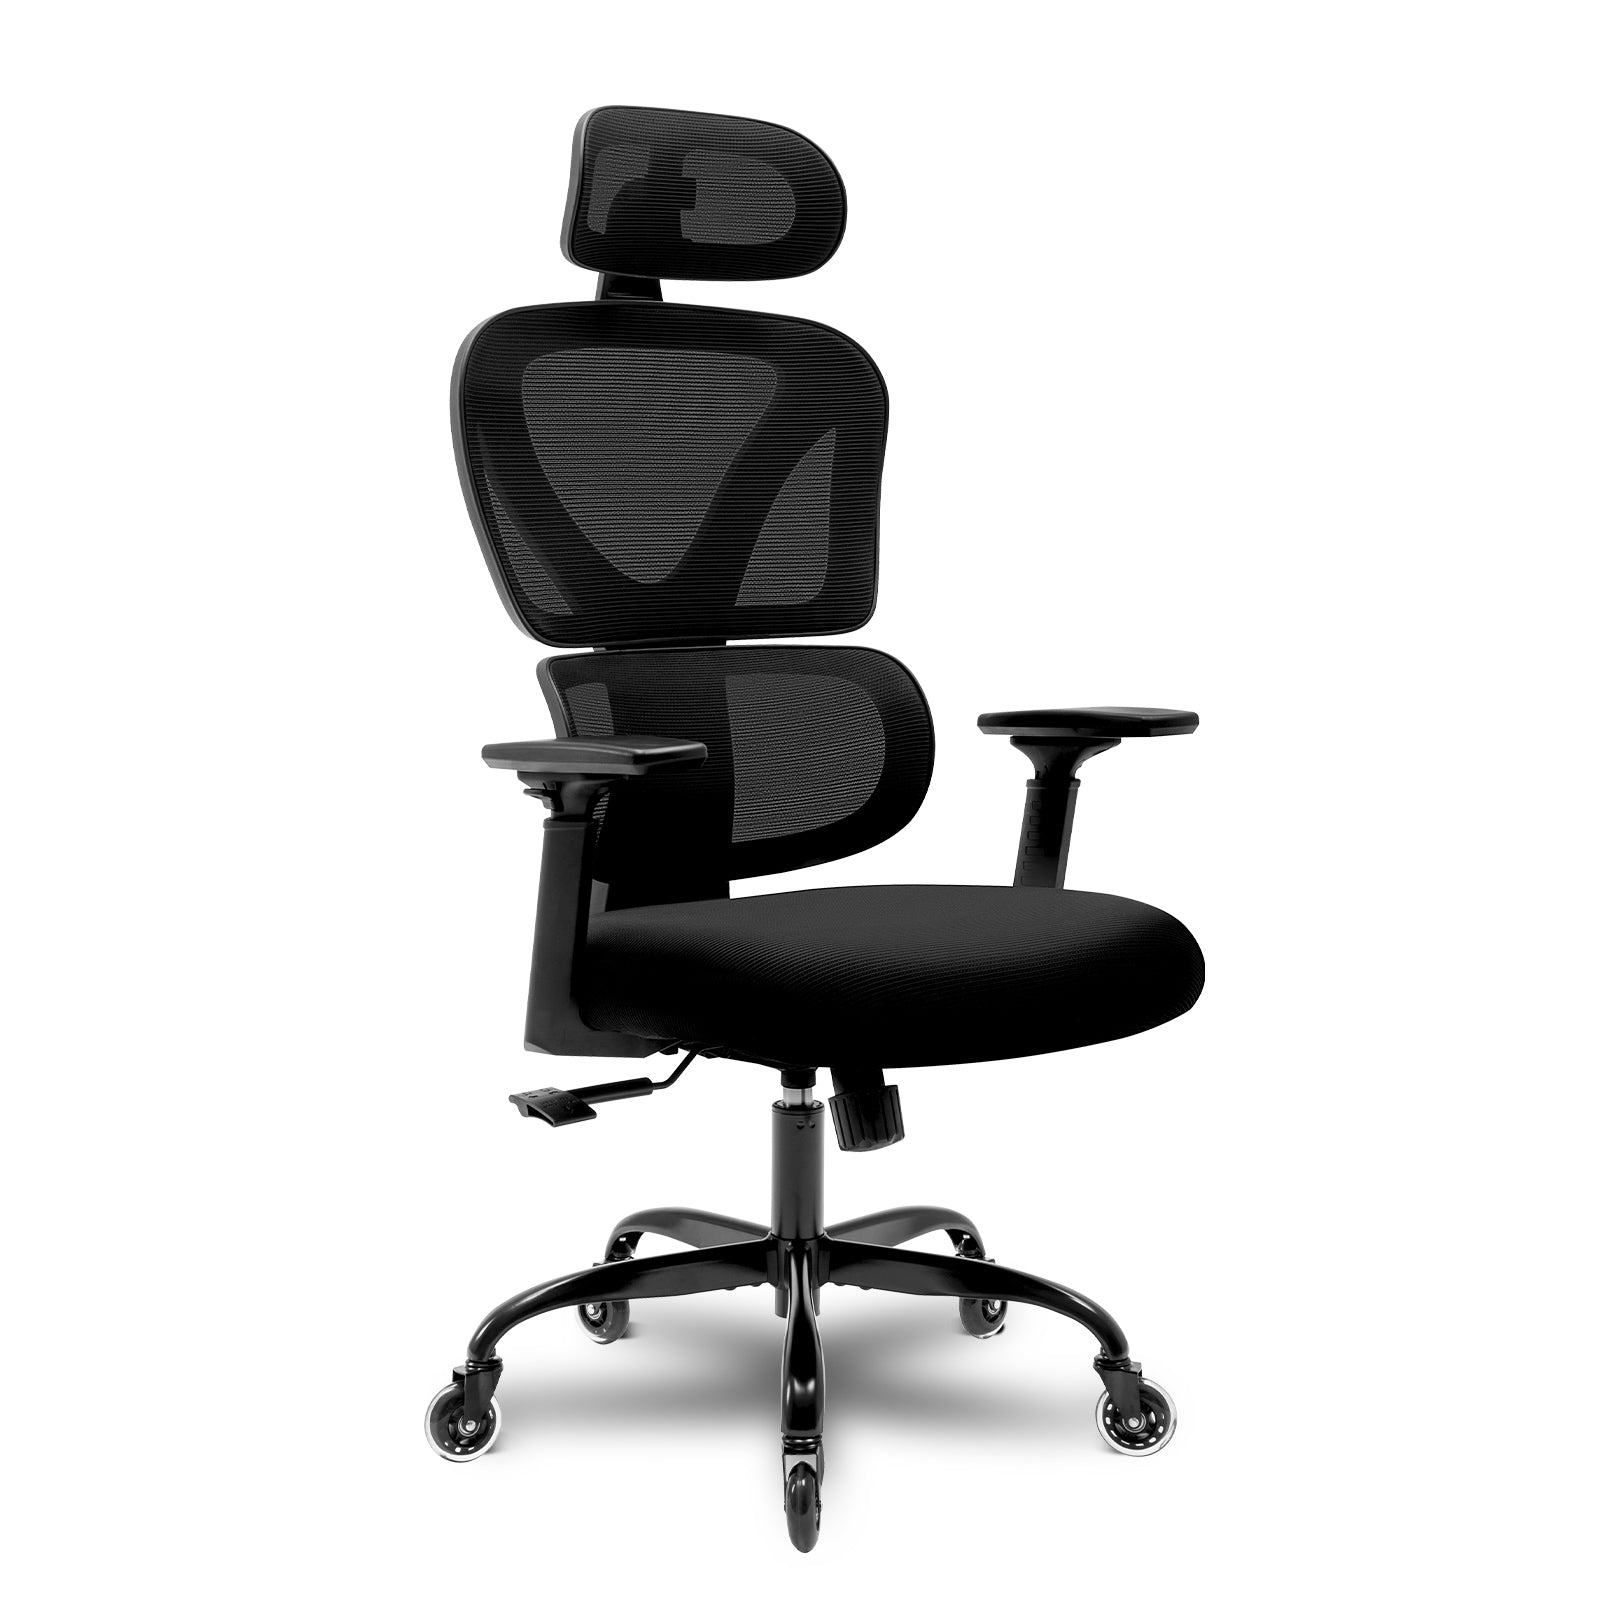 Best Ergonomic Office Chair: Comfort and Health at Work